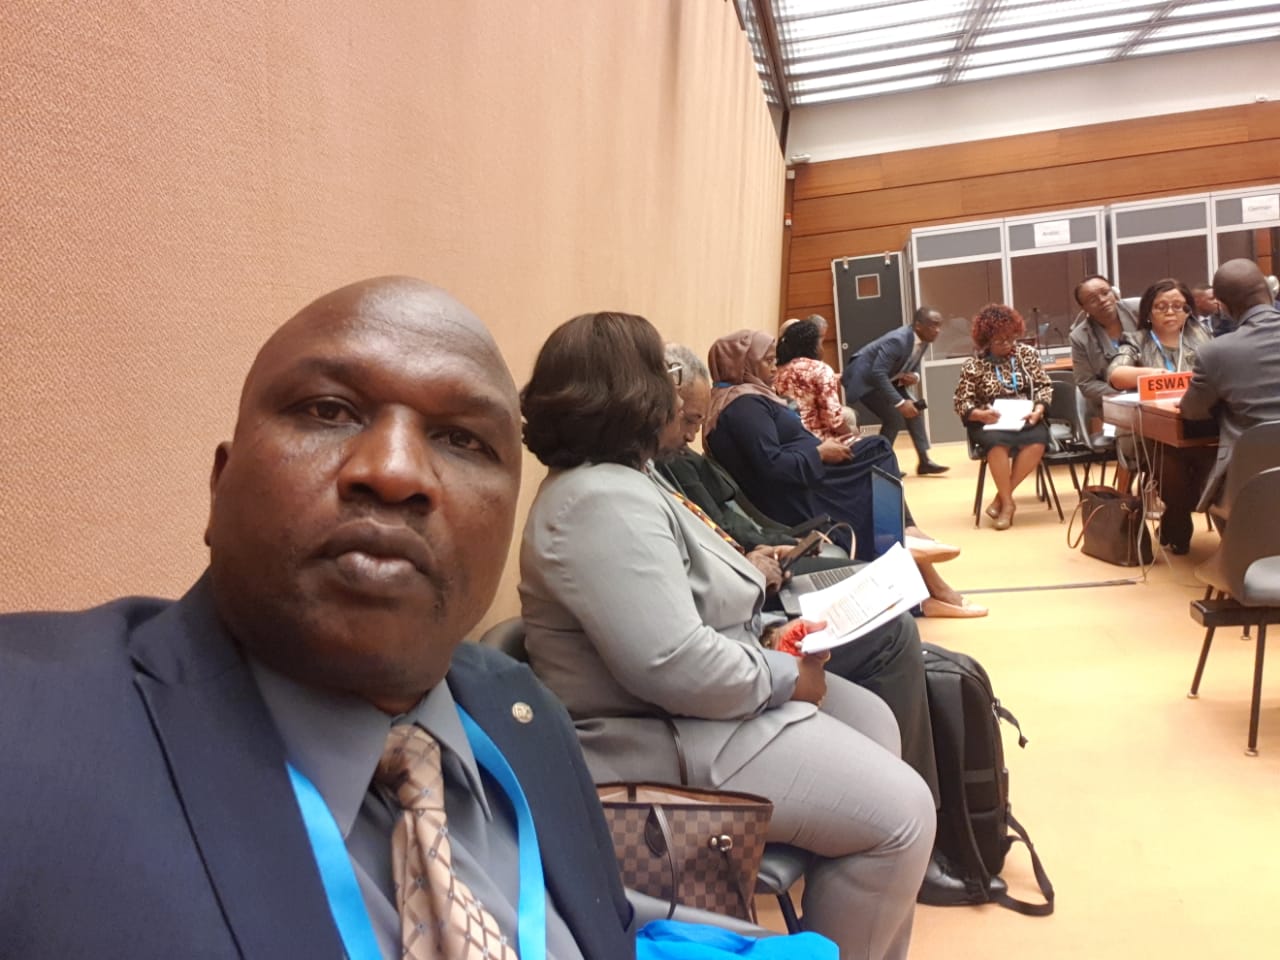 The Kenyan delegation actively participated in the panel discussions and gained valuable insights into the best way forward for their country's involvement in the vaccine manufacturing space